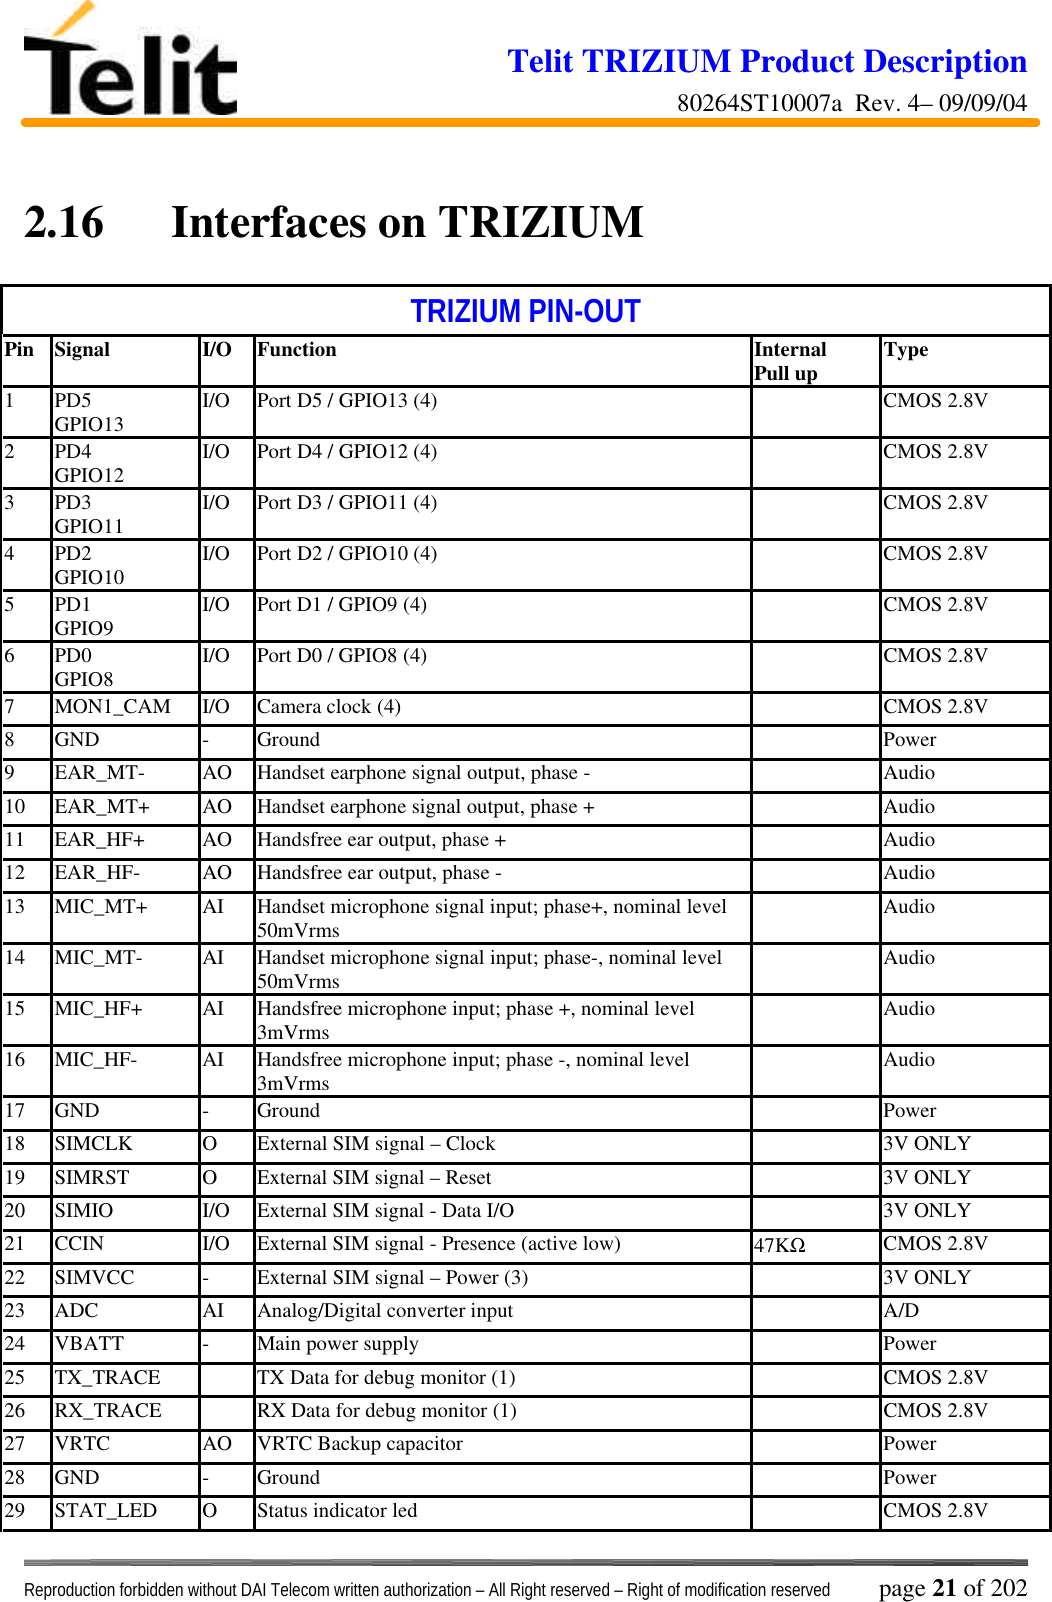 Telit TRIZIUM Product Description80264ST10007a  Rev. 4– 09/09/04Reproduction forbidden without DAI Telecom written authorization – All Right reserved – Right of modification reserved page 21 of 2022.16 Interfaces on TRIZIUMTRIZIUM PIN-OUTPin Signal I/O Function InternalPull up Type1PD5GPIO13 I/O Port D5 / GPIO13 (4) CMOS 2.8V2PD4GPIO12 I/O Port D4 / GPIO12 (4) CMOS 2.8V3PD3GPIO11 I/O Port D3 / GPIO11 (4) CMOS 2.8V4PD2GPIO10 I/O Port D2 / GPIO10 (4) CMOS 2.8V5PD1GPIO9 I/O Port D1 / GPIO9 (4) CMOS 2.8V6PD0GPIO8 I/O Port D0 / GPIO8 (4) CMOS 2.8V7MON1_CAM I/O Camera clock (4) CMOS 2.8V8GND -Ground Power9EAR_MT- AO Handset earphone signal output, phase - Audio10 EAR_MT+ AO Handset earphone signal output, phase + Audio11 EAR_HF+ AO Handsfree ear output, phase + Audio12 EAR_HF- AO Handsfree ear output, phase - Audio13 MIC_MT+ AI Handset microphone signal input; phase+, nominal level50mVrms Audio14 MIC_MT- AI Handset microphone signal input; phase-, nominal level50mVrms Audio15 MIC_HF+ AI Handsfree microphone input; phase +, nominal level3mVrms Audio16 MIC_HF- AI Handsfree microphone input; phase -, nominal level3mVrms Audio17 GND -Ground Power18 SIMCLK OExternal SIM signal – Clock 3V ONLY19 SIMRST OExternal SIM signal – Reset 3V ONLY20 SIMIO I/O External SIM signal - Data I/O 3V ONLY21 CCIN I/O External SIM signal - Presence (active low) 47KΩCMOS 2.8V22 SIMVCC -External SIM signal – Power (3) 3V ONLY23 ADC AI Analog/Digital converter input A/D24 VBATT -Main power supply Power25 TX_TRACE TX Data for debug monitor (1) CMOS 2.8V26 RX_TRACE RX Data for debug monitor (1) CMOS 2.8V27 VRTC AO VRTC Backup capacitor Power28 GND -Ground Power29 STAT_LED OStatus indicator led CMOS 2.8V